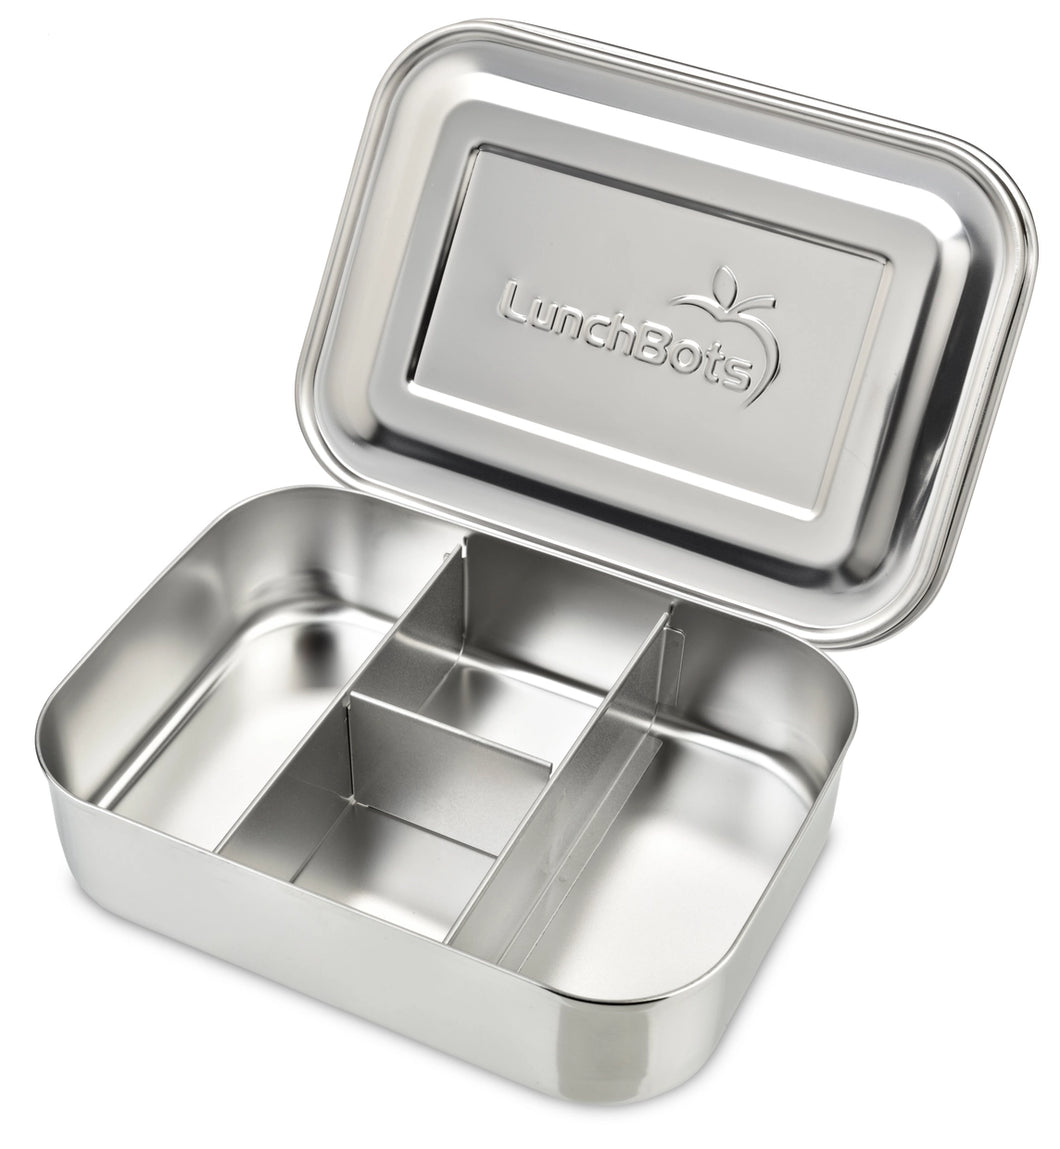 LunchBots - Small Bento Protein Packer Stainless